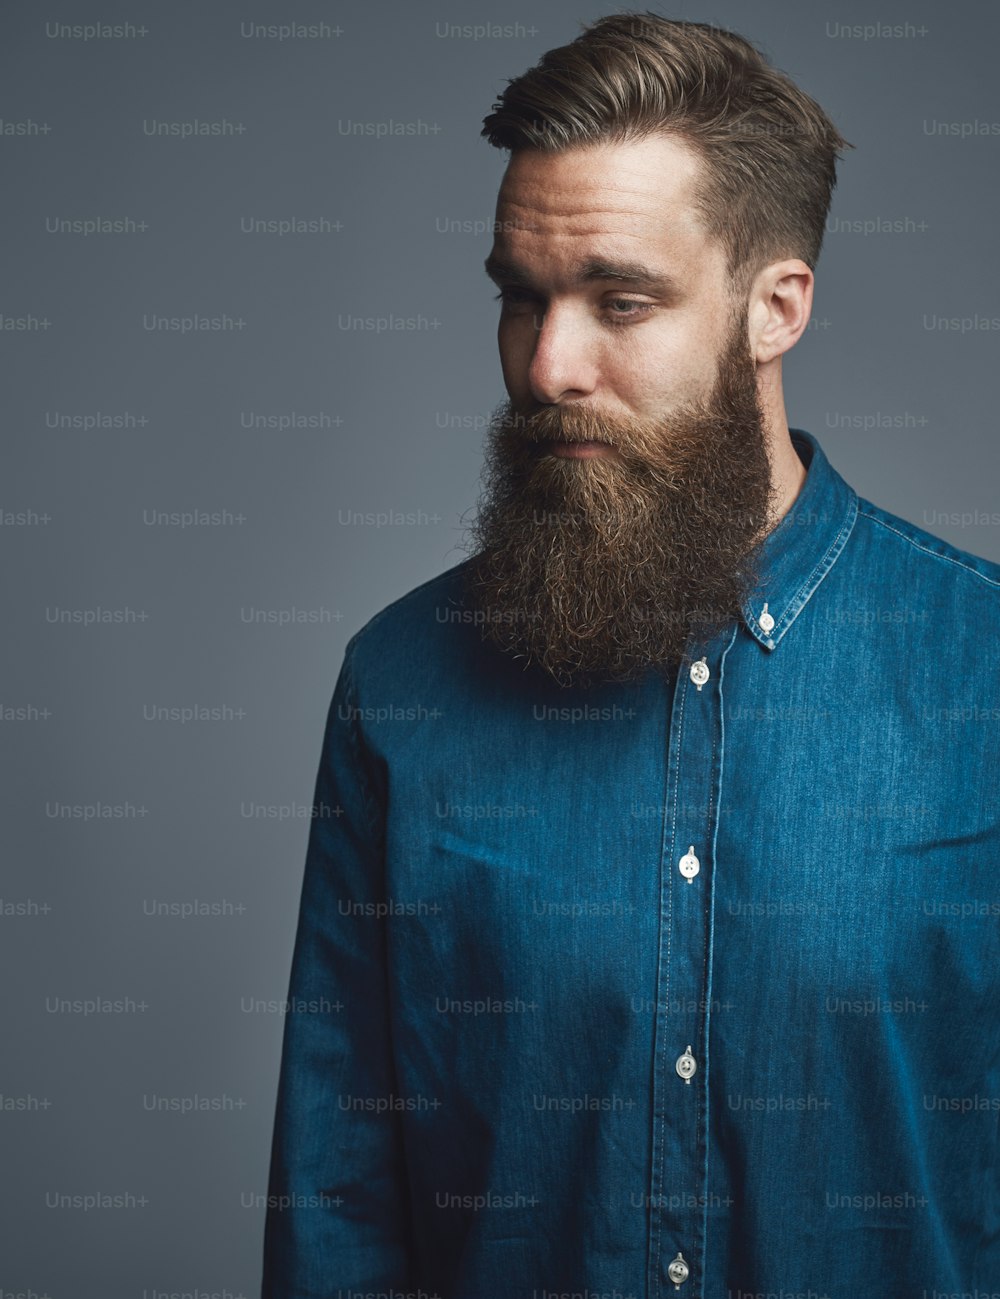 Stylish young man with a long beard looking deep in thought while standing alone against a gray background